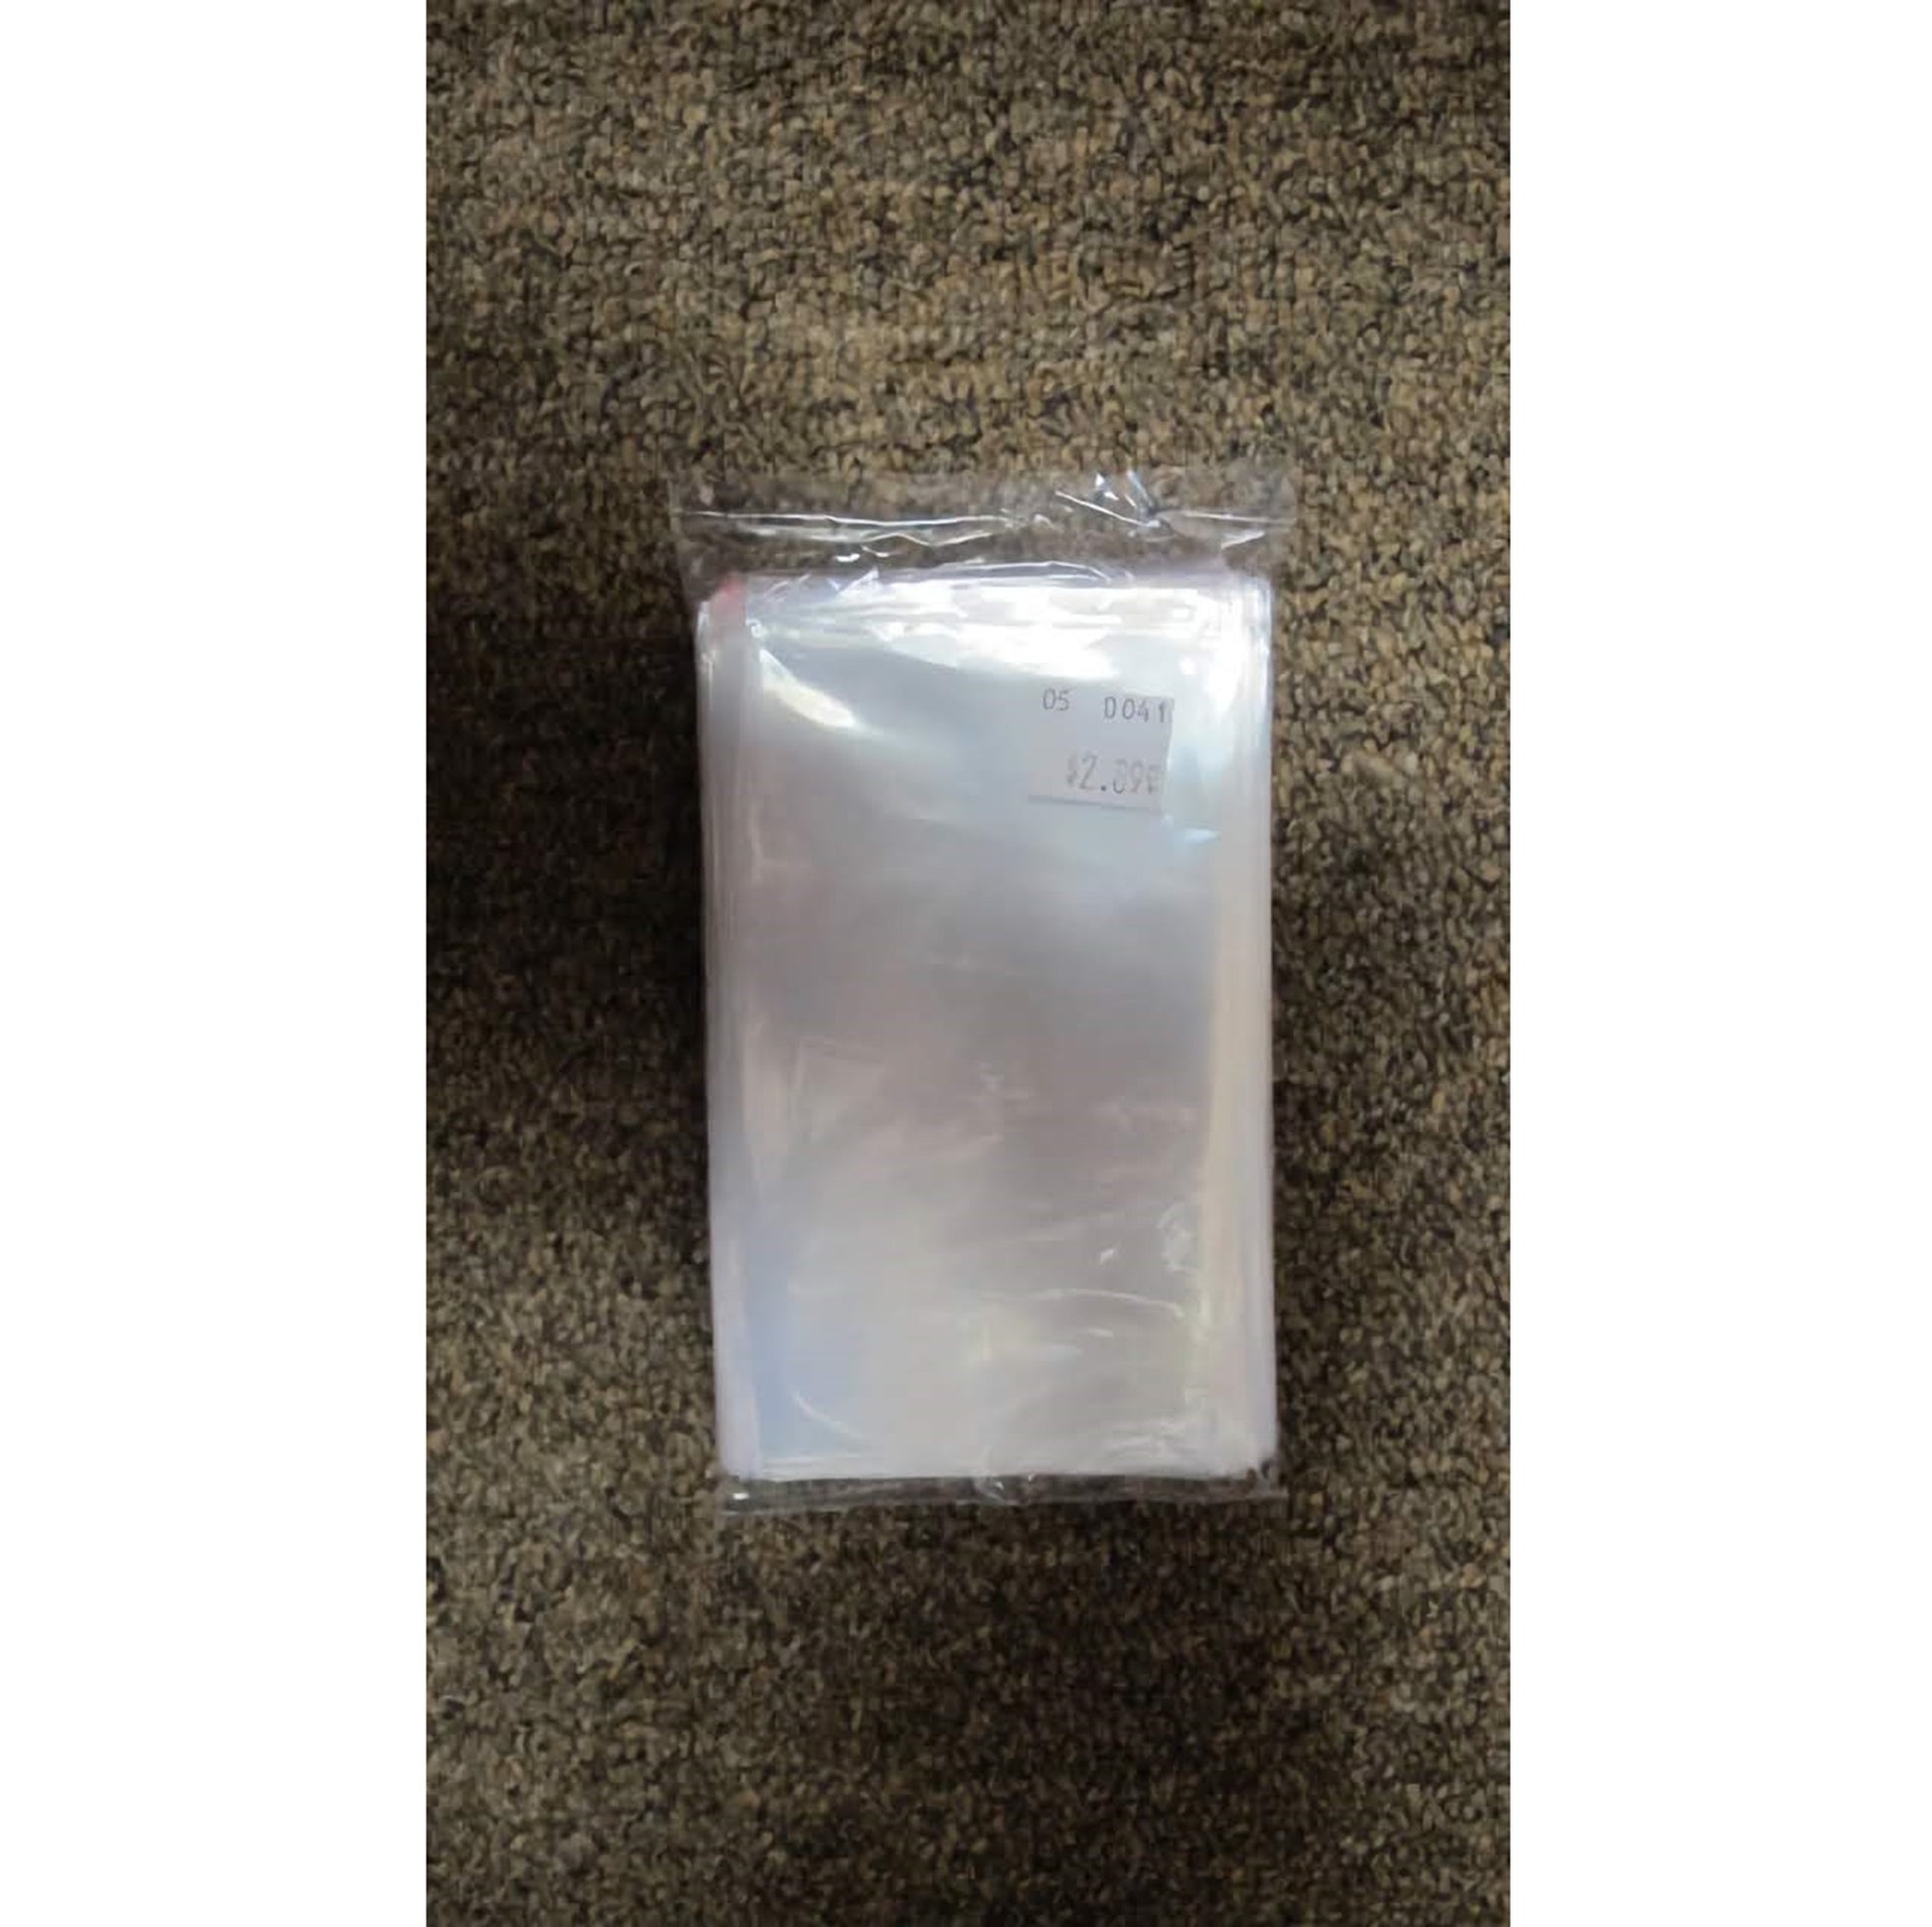 A package of 100 clear poly sucker bags with dimensions of 3 x 5 inches. The plastic wrapping is slightly reflective, with light creating a soft glow on the surface.